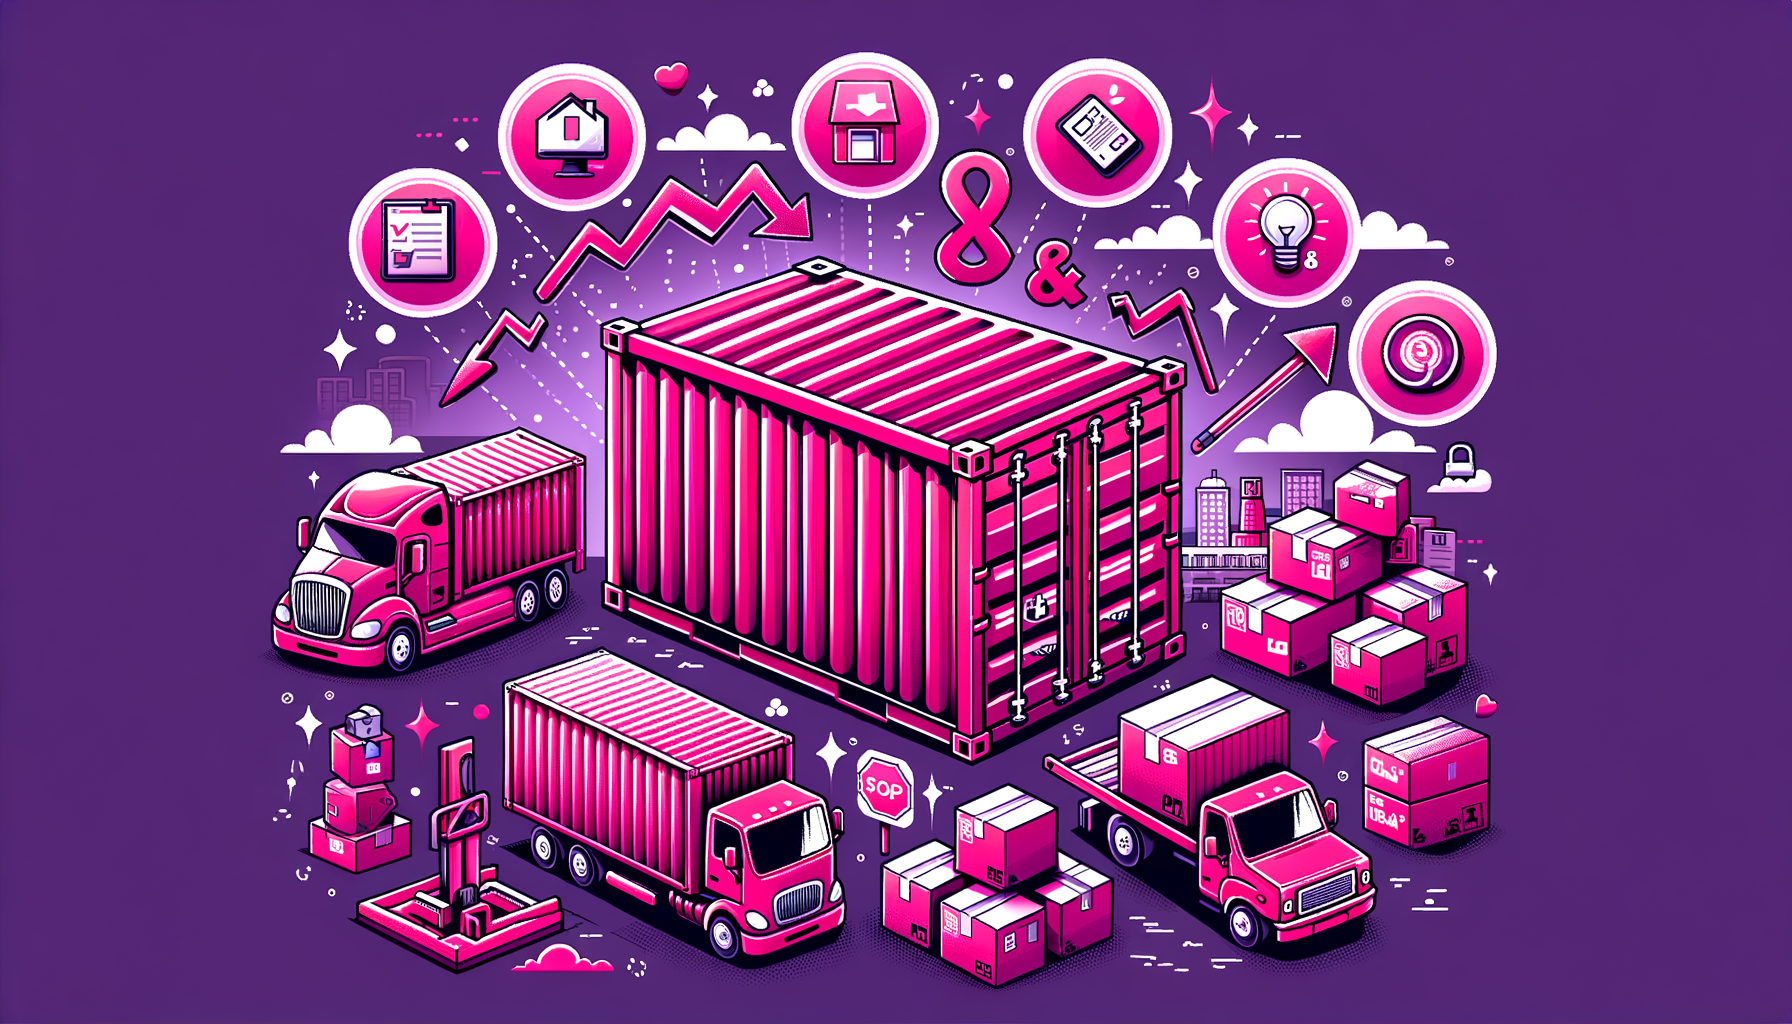 Fuschia colored cartoon-like illustration of a shipping container, indicative of moving process.